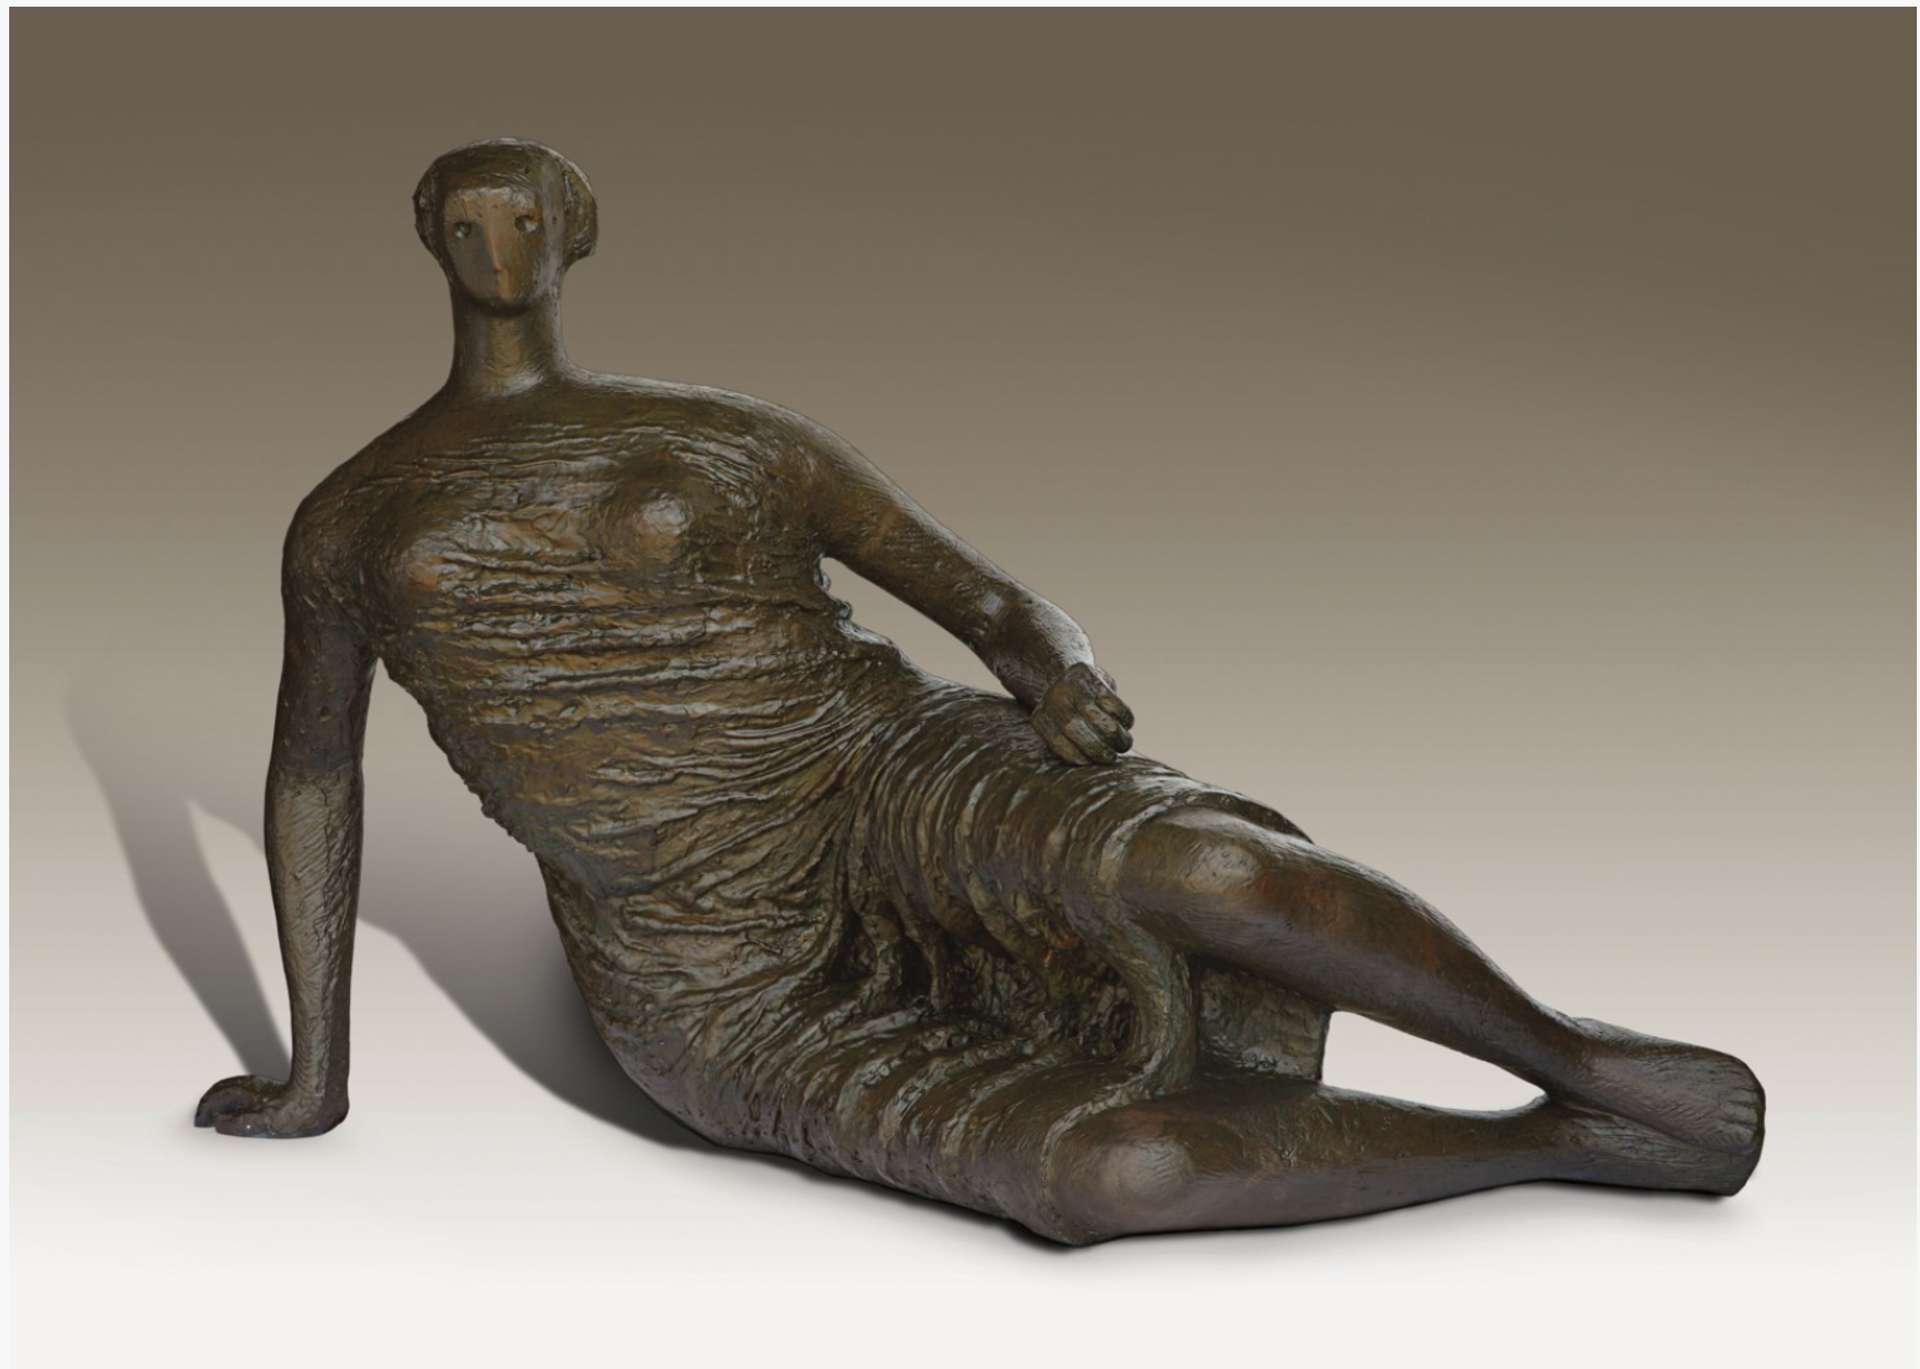 A sculpture by Henry Moore featuring a seated woman. The woman is depicted resting on the side of her thigh, with one arm on her hip and the other supporting her weight by being planted in the ground. The sculpture highlights prominent protruding breasts and showcases a crinkled drapery that resembles a dress, enveloping the body.